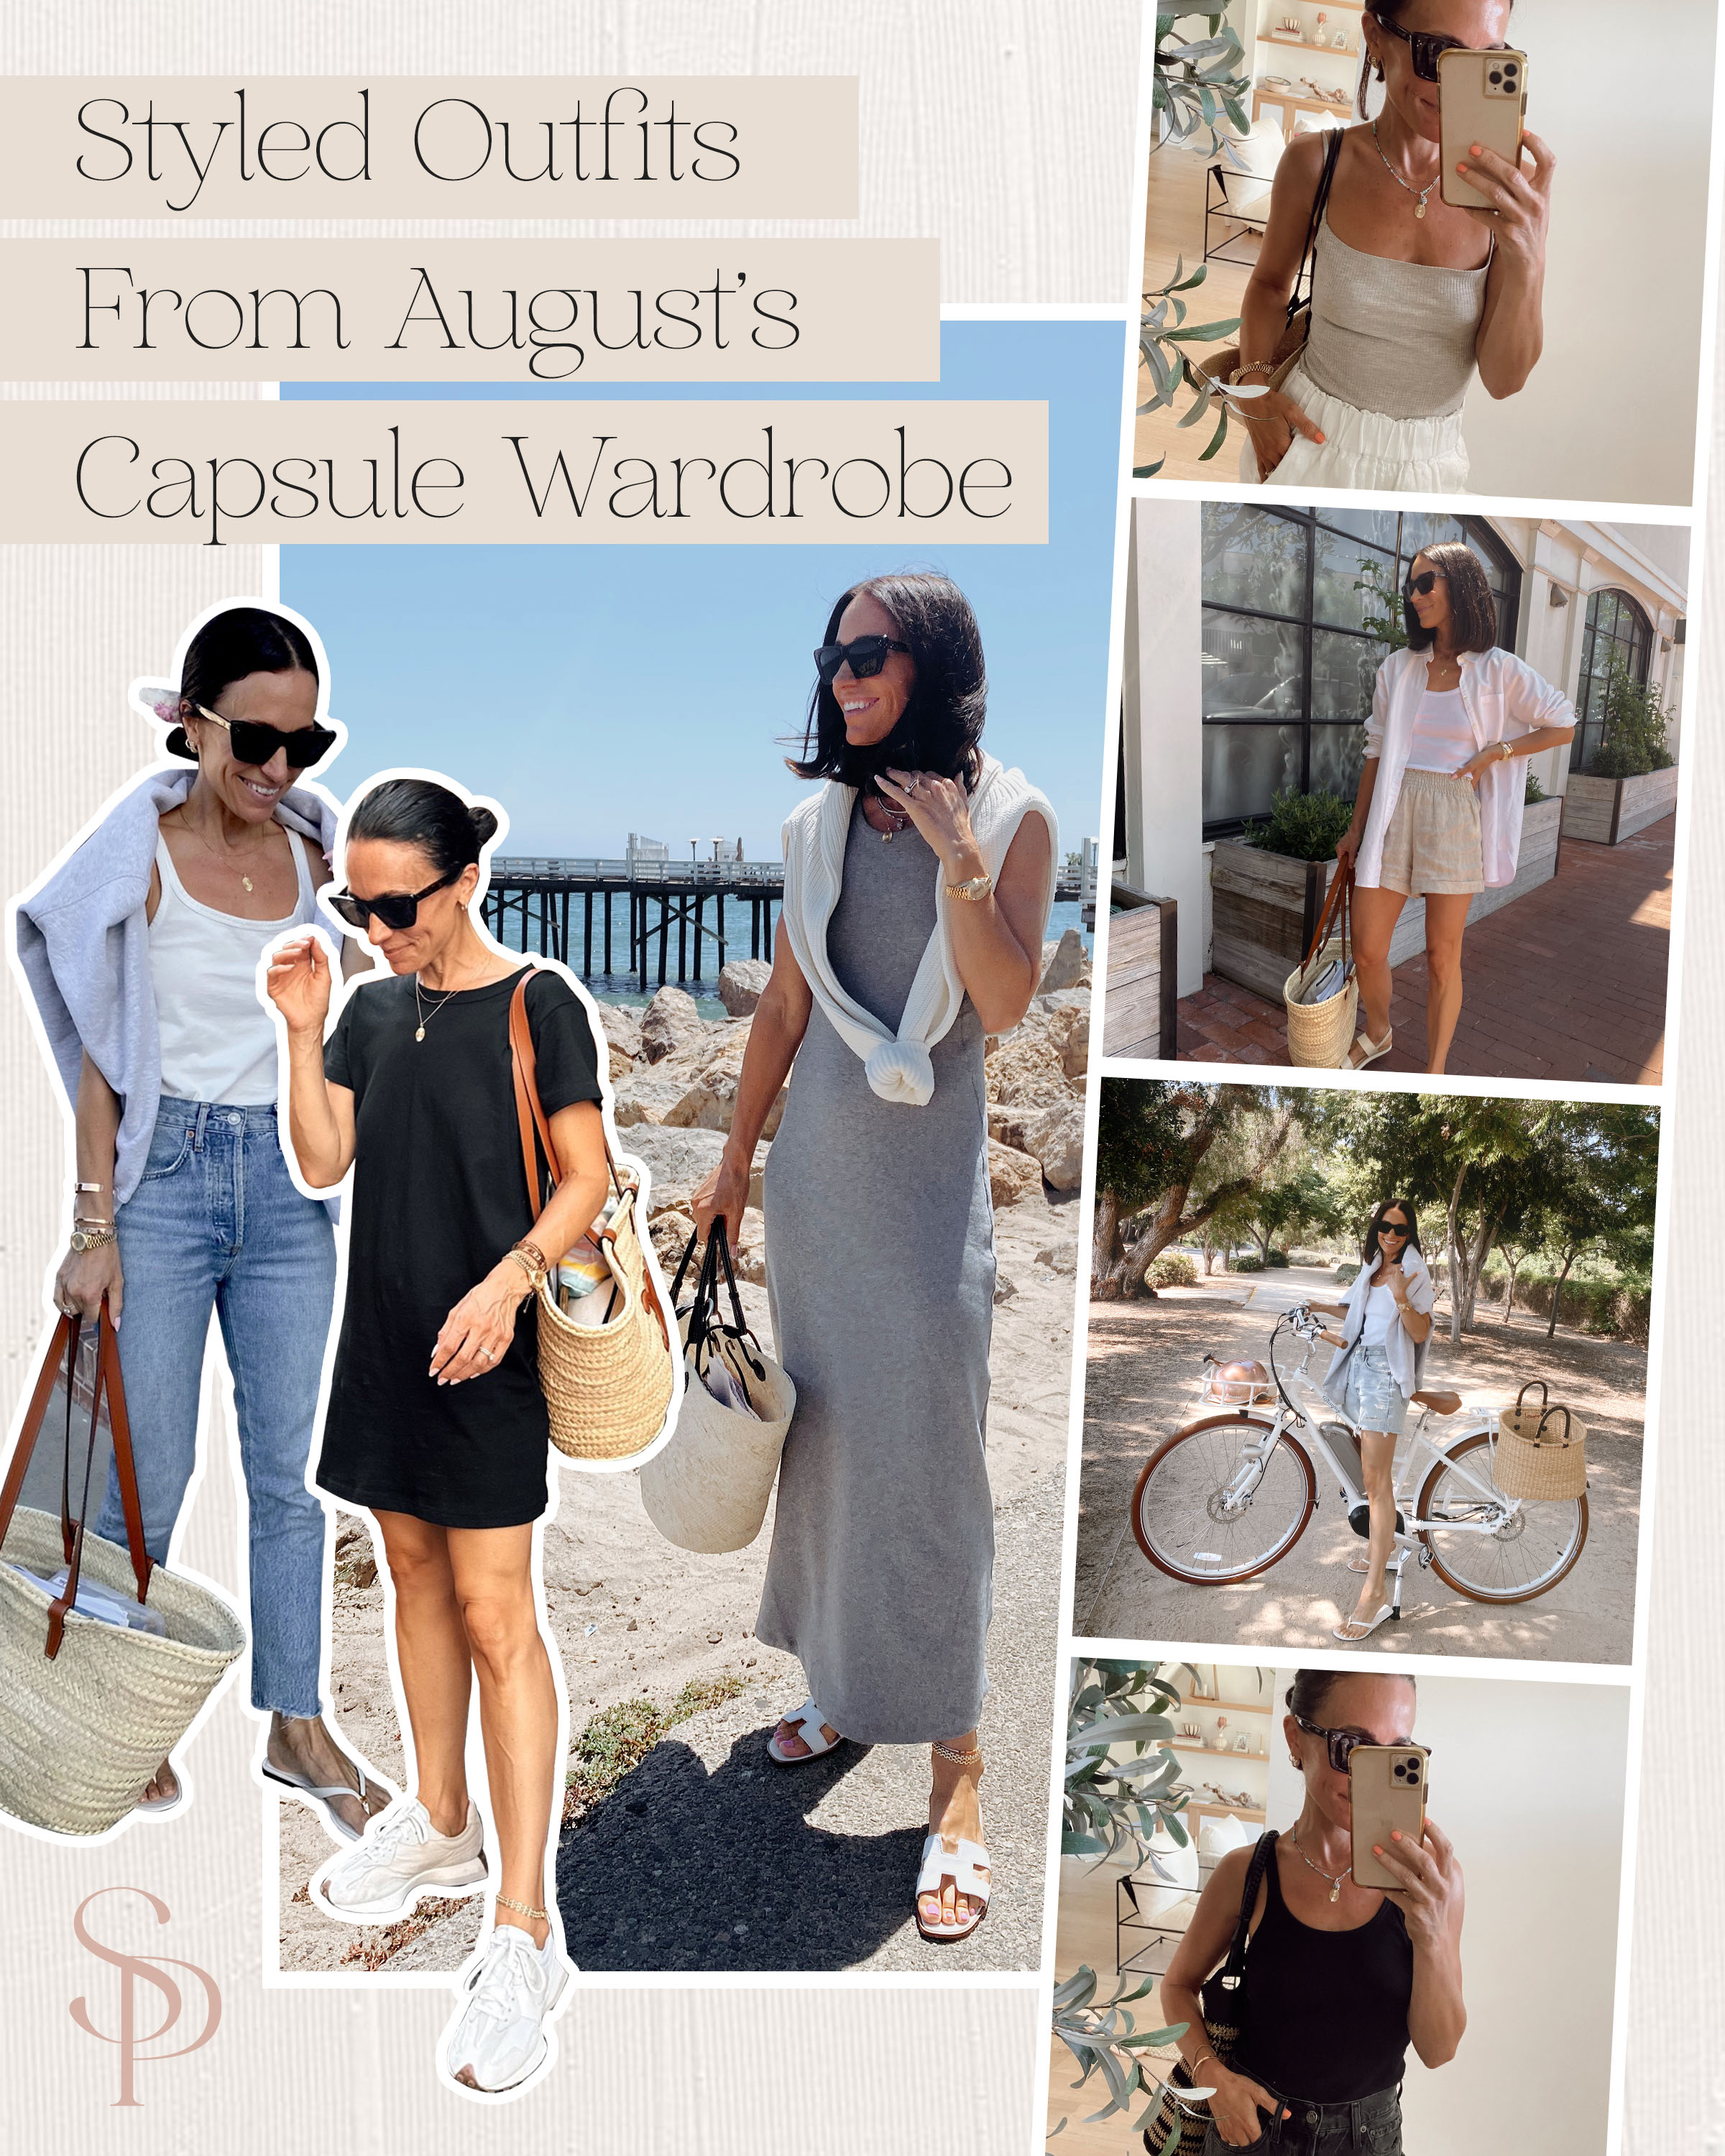 Summer Capsule Wardrobe - 20+ Items, More Than 30 Outfits